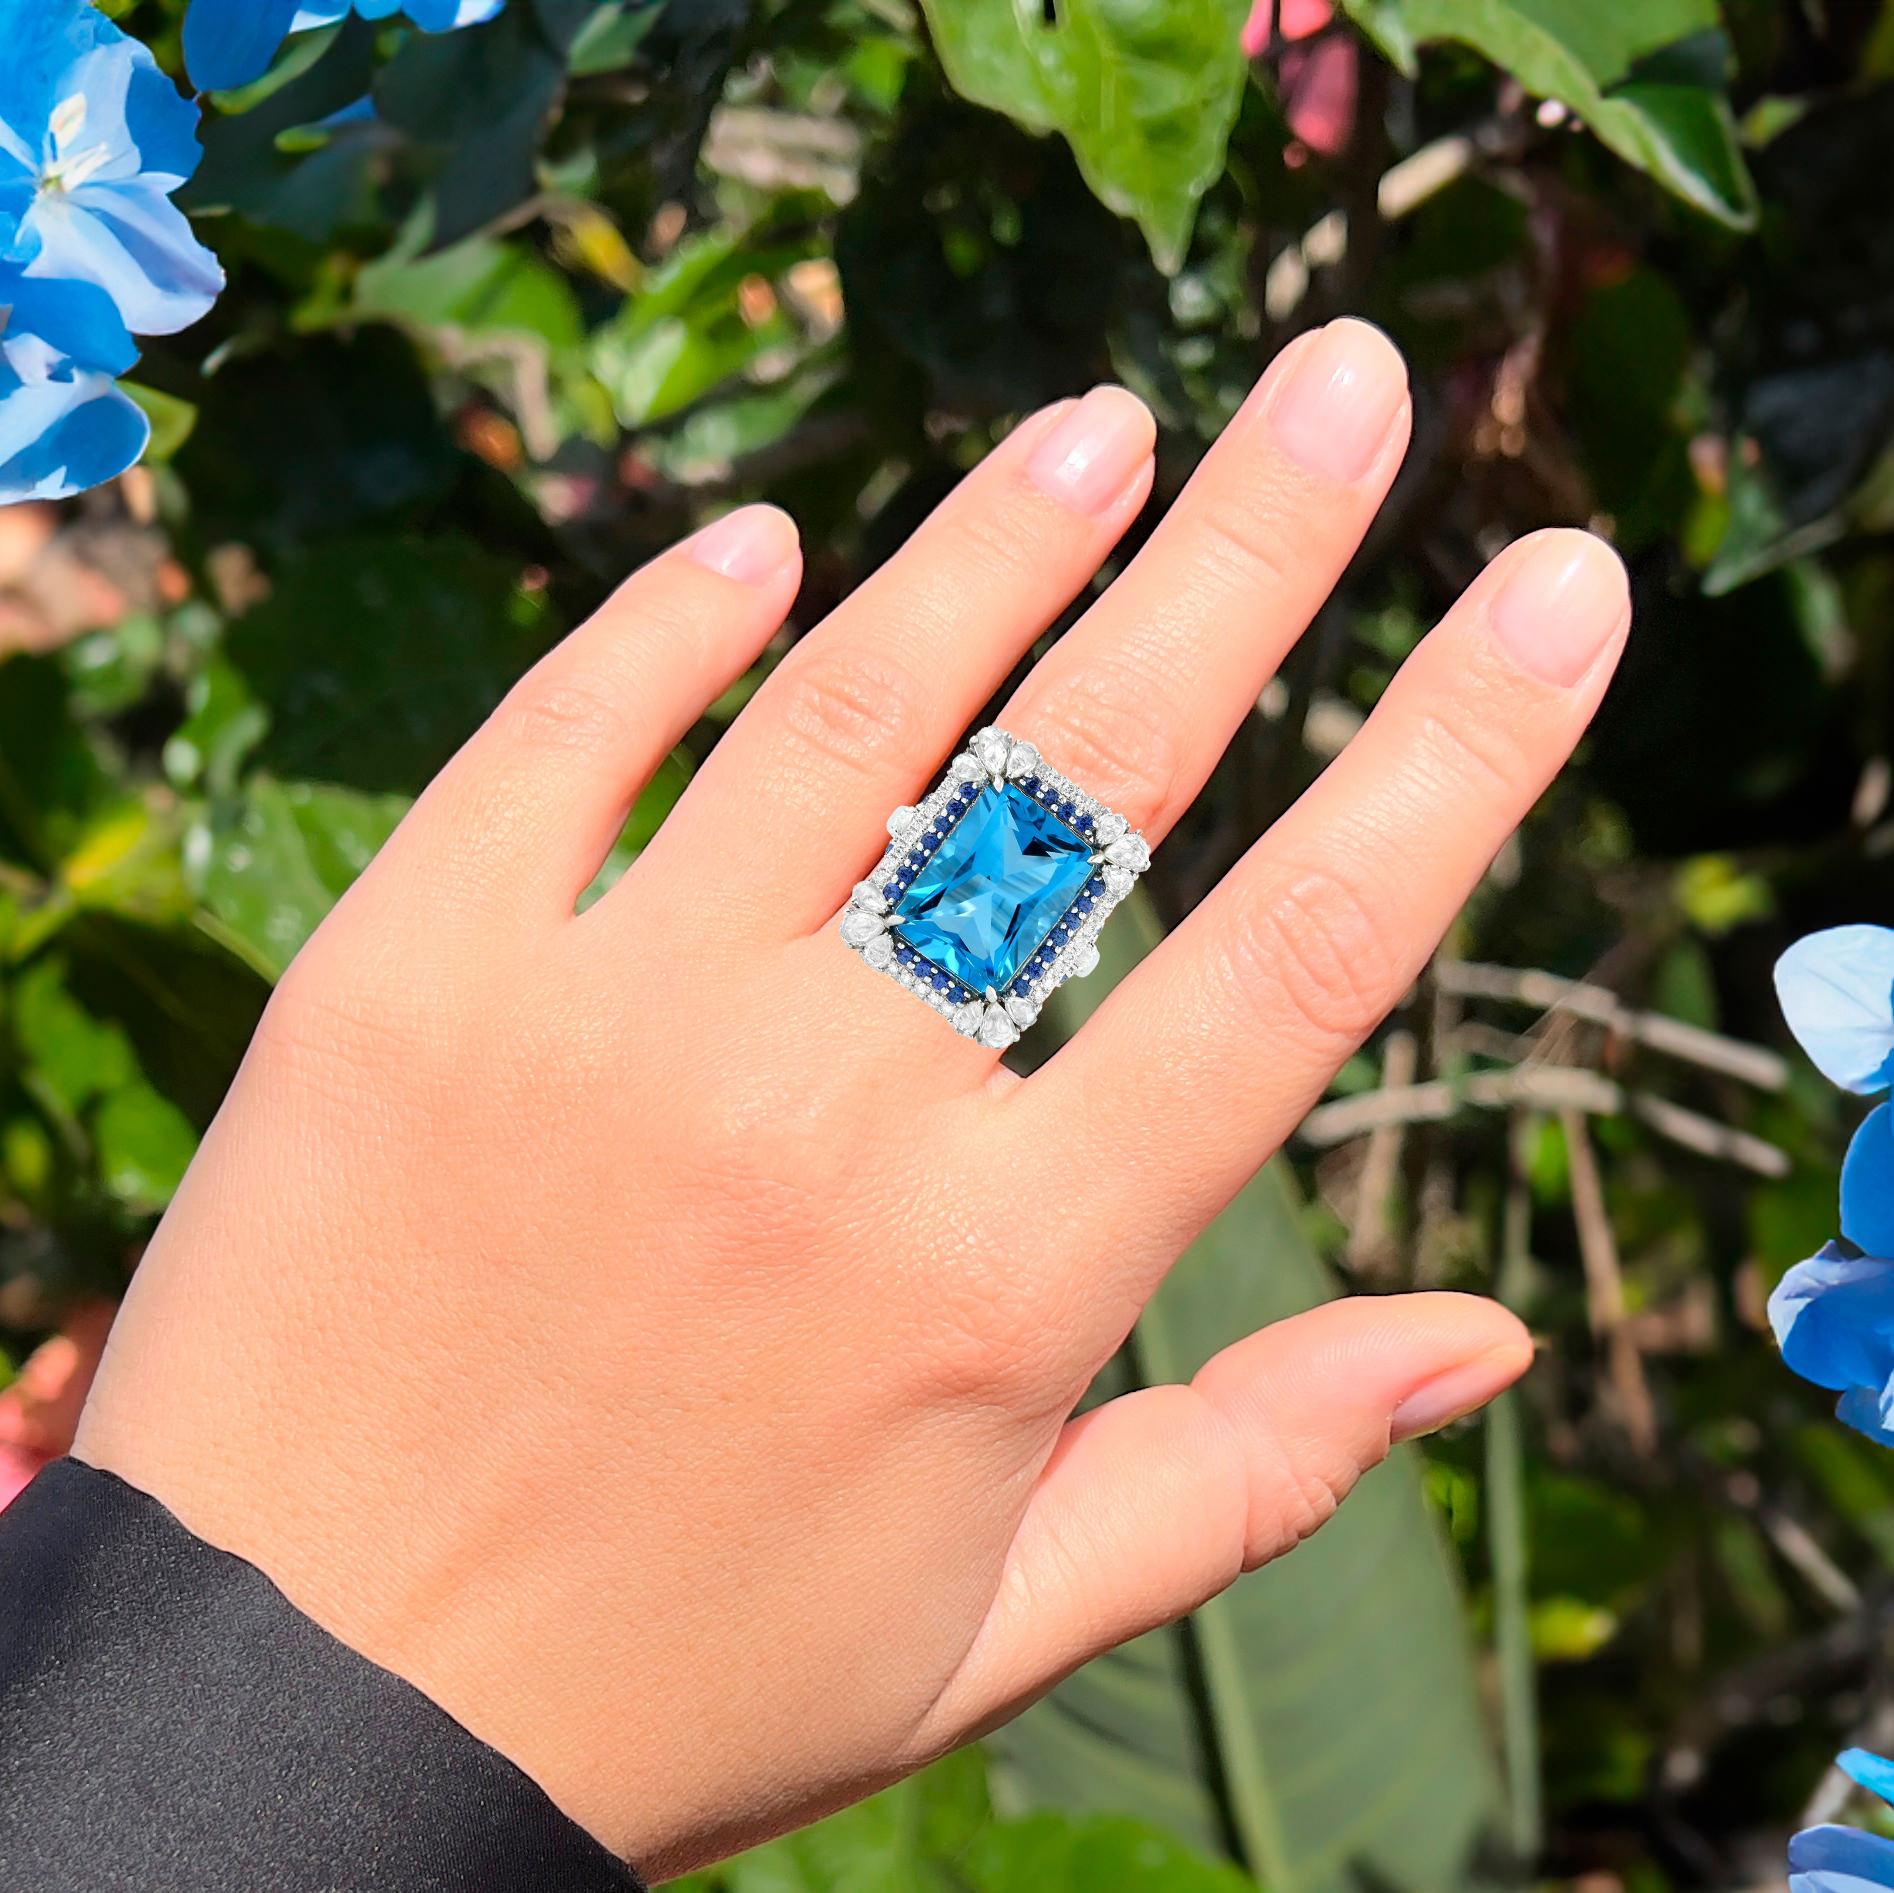 Contemporary Blue Topaz Ring With Sapphires and Diamonds 13.14 Carats 18K White Gold